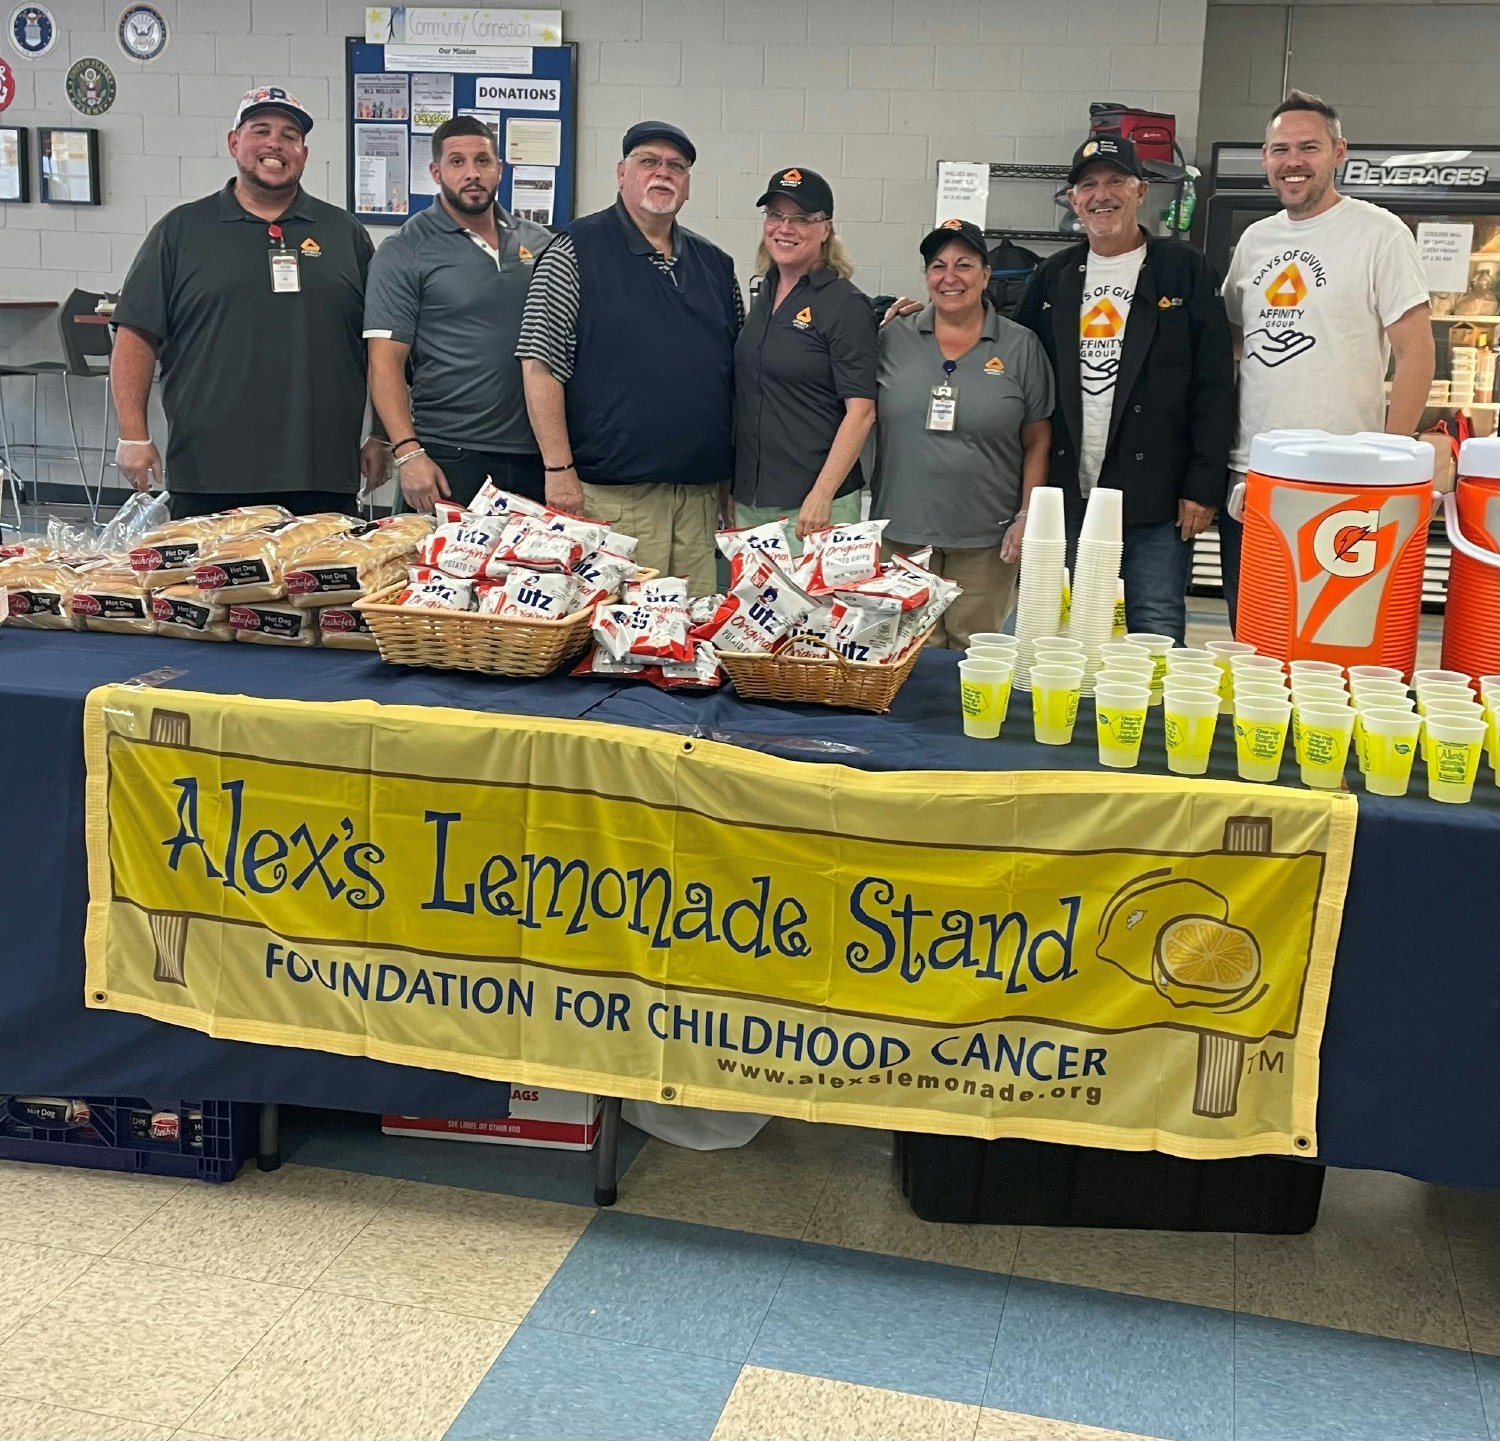 Retail Team supporting Alex's Lemonade Stand to battle childhood cancer. 